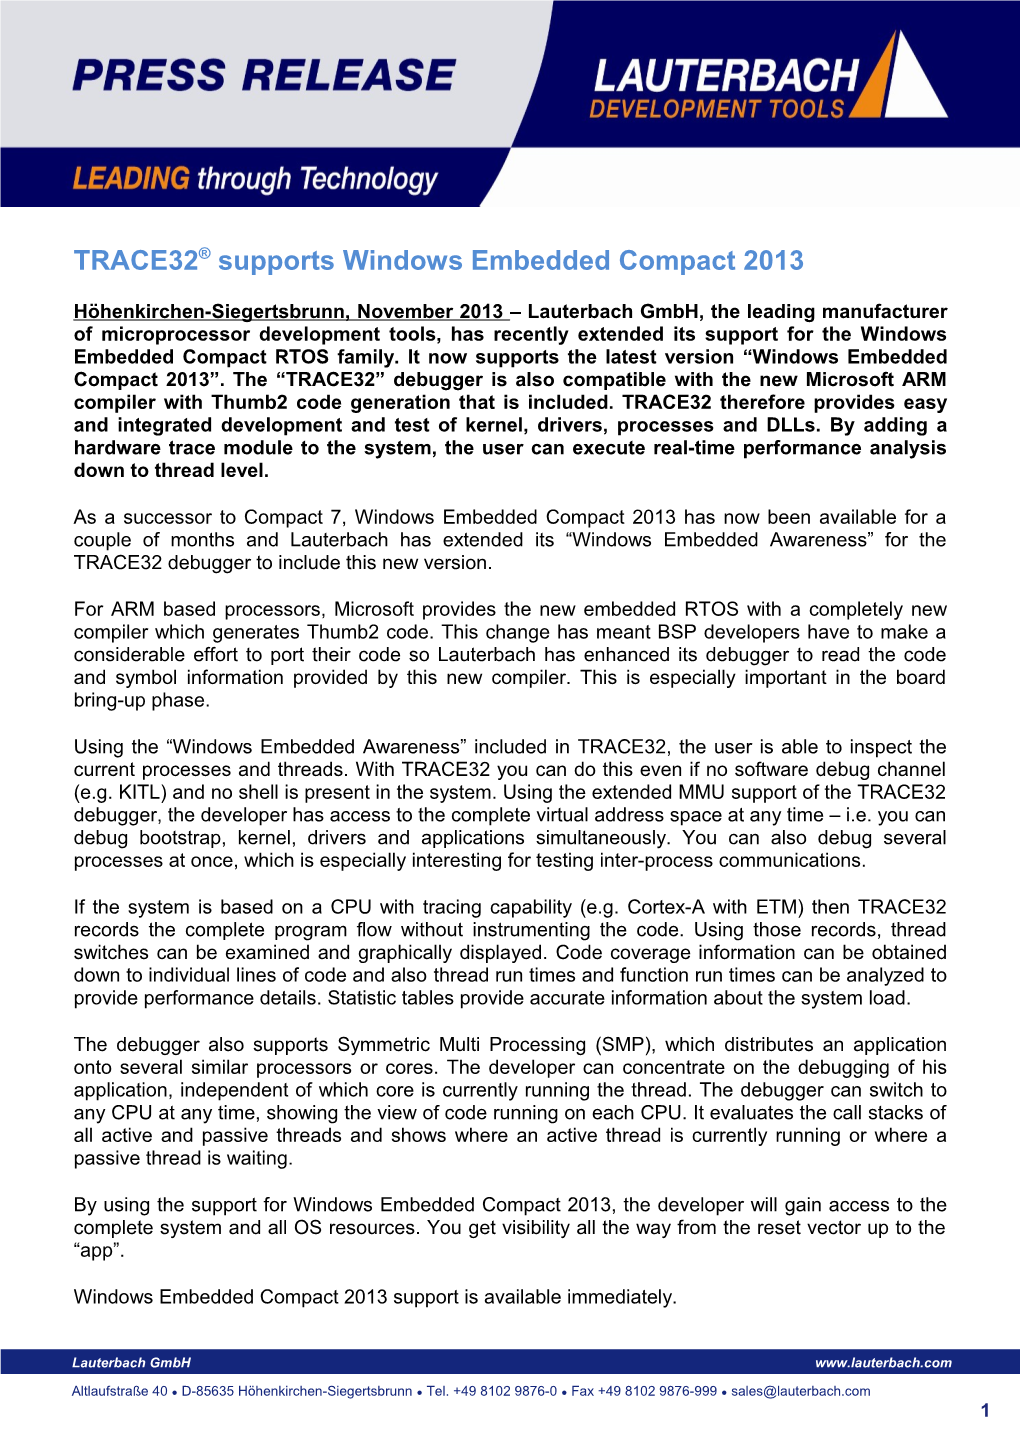 TRACE32 Supports Windows Embedded Compact 2013